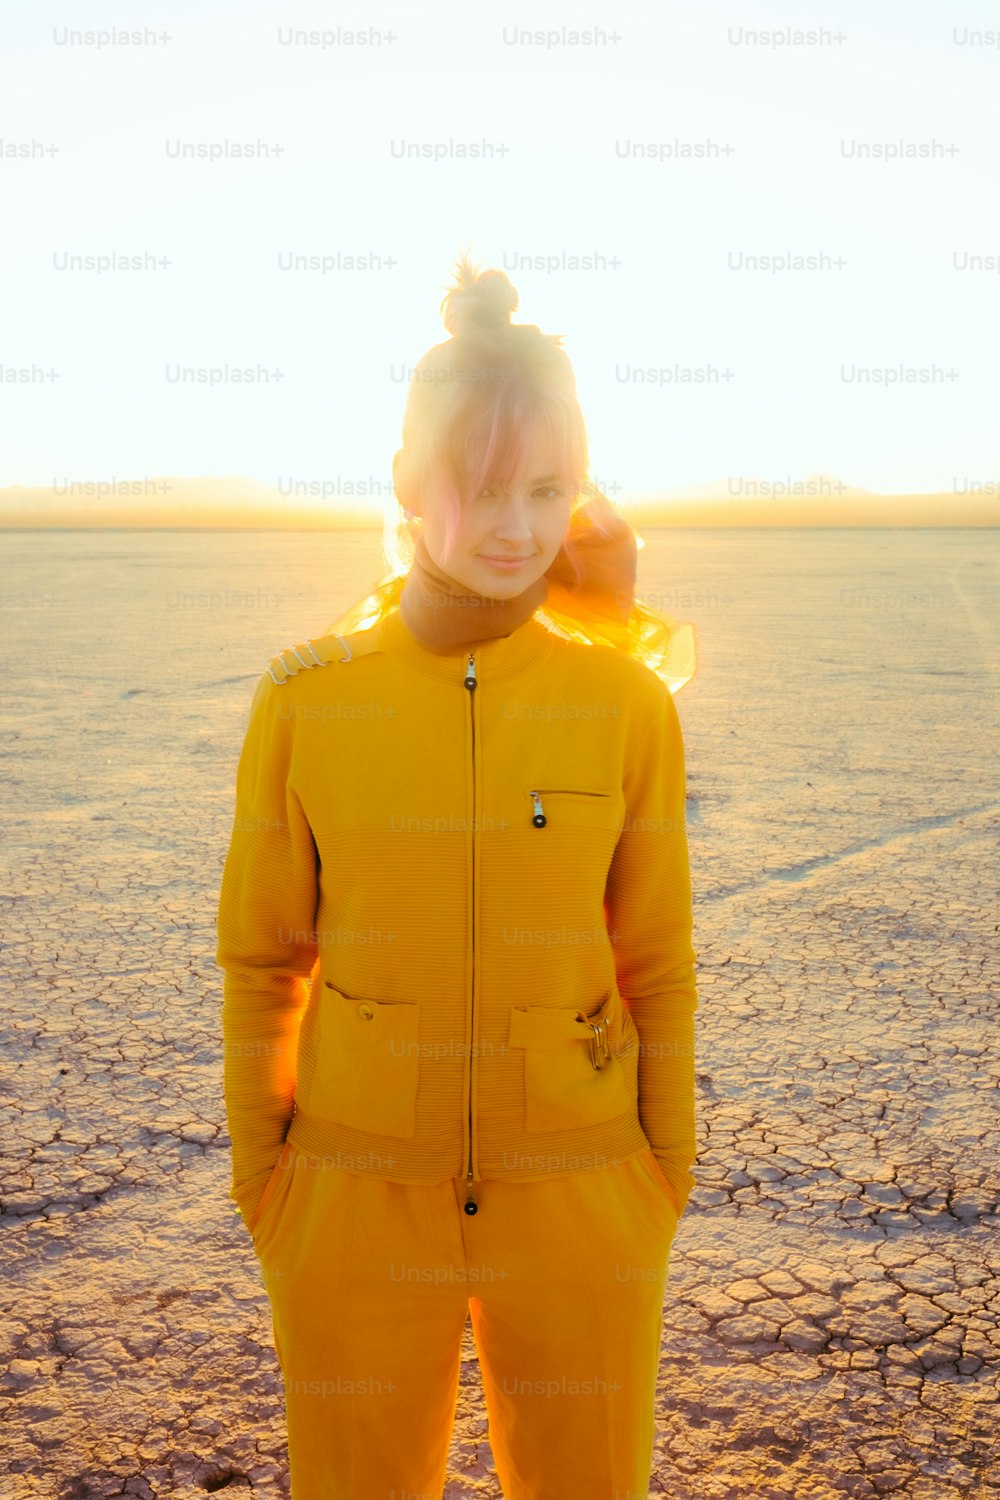 a person in a yellow suit standing on a beach